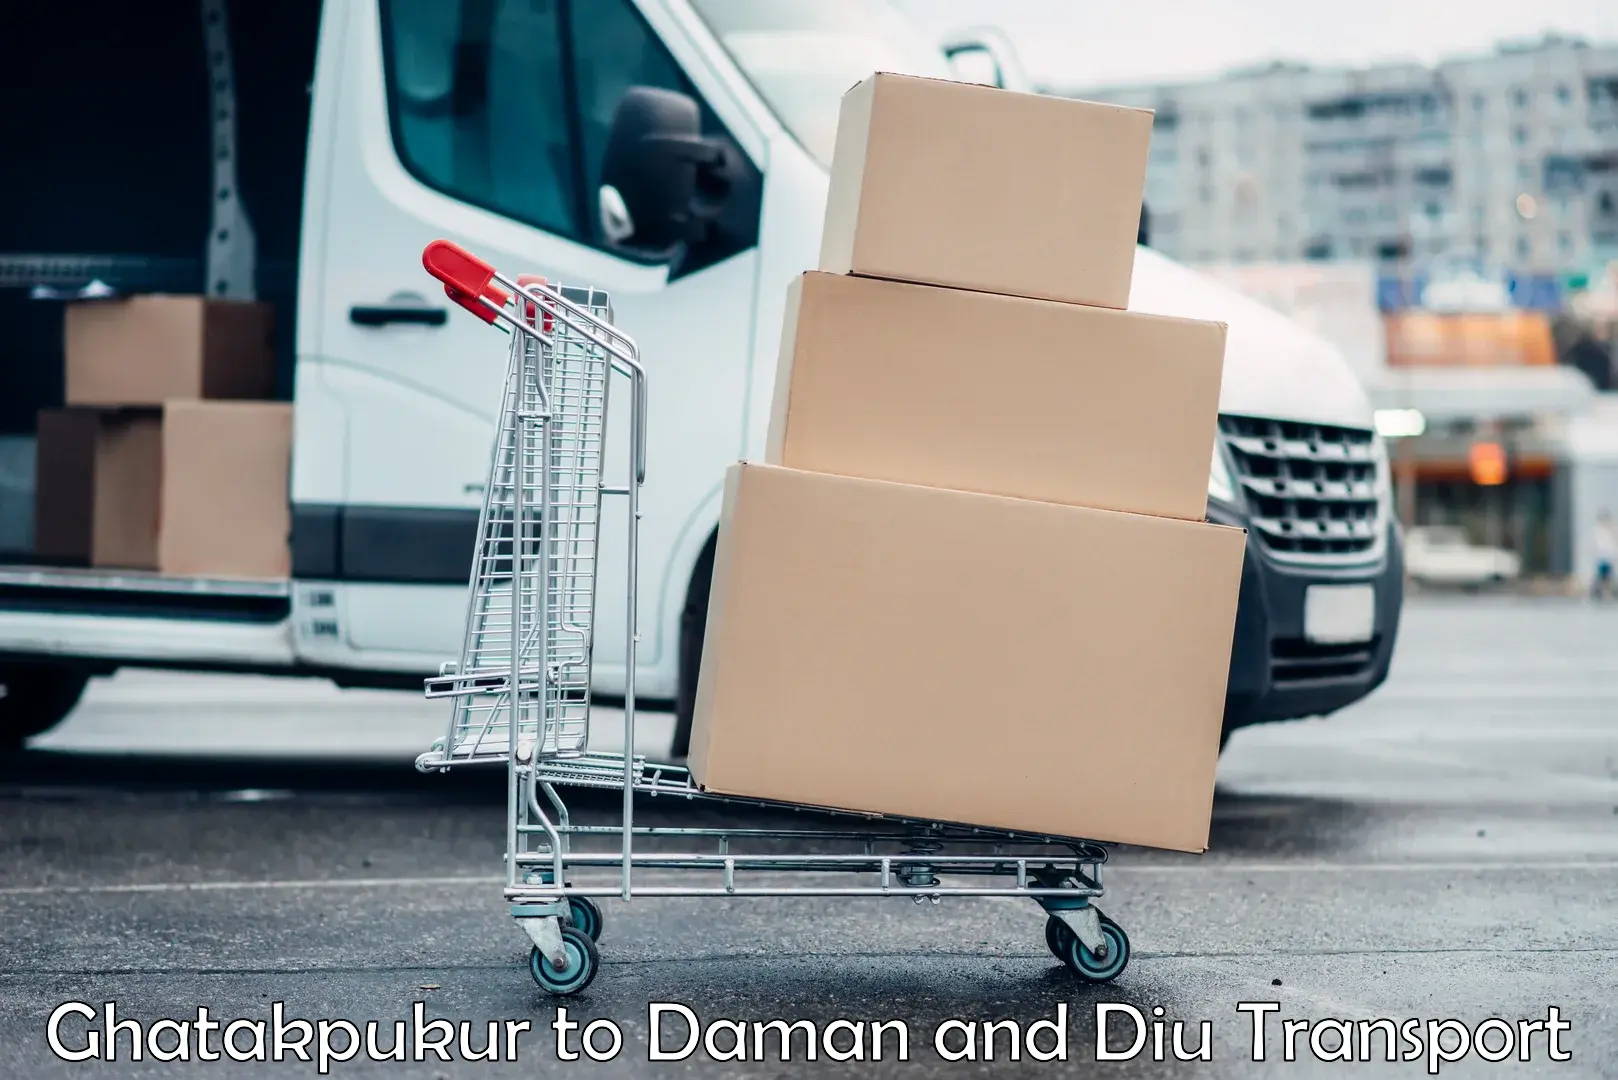 Daily parcel service transport Ghatakpukur to Daman and Diu